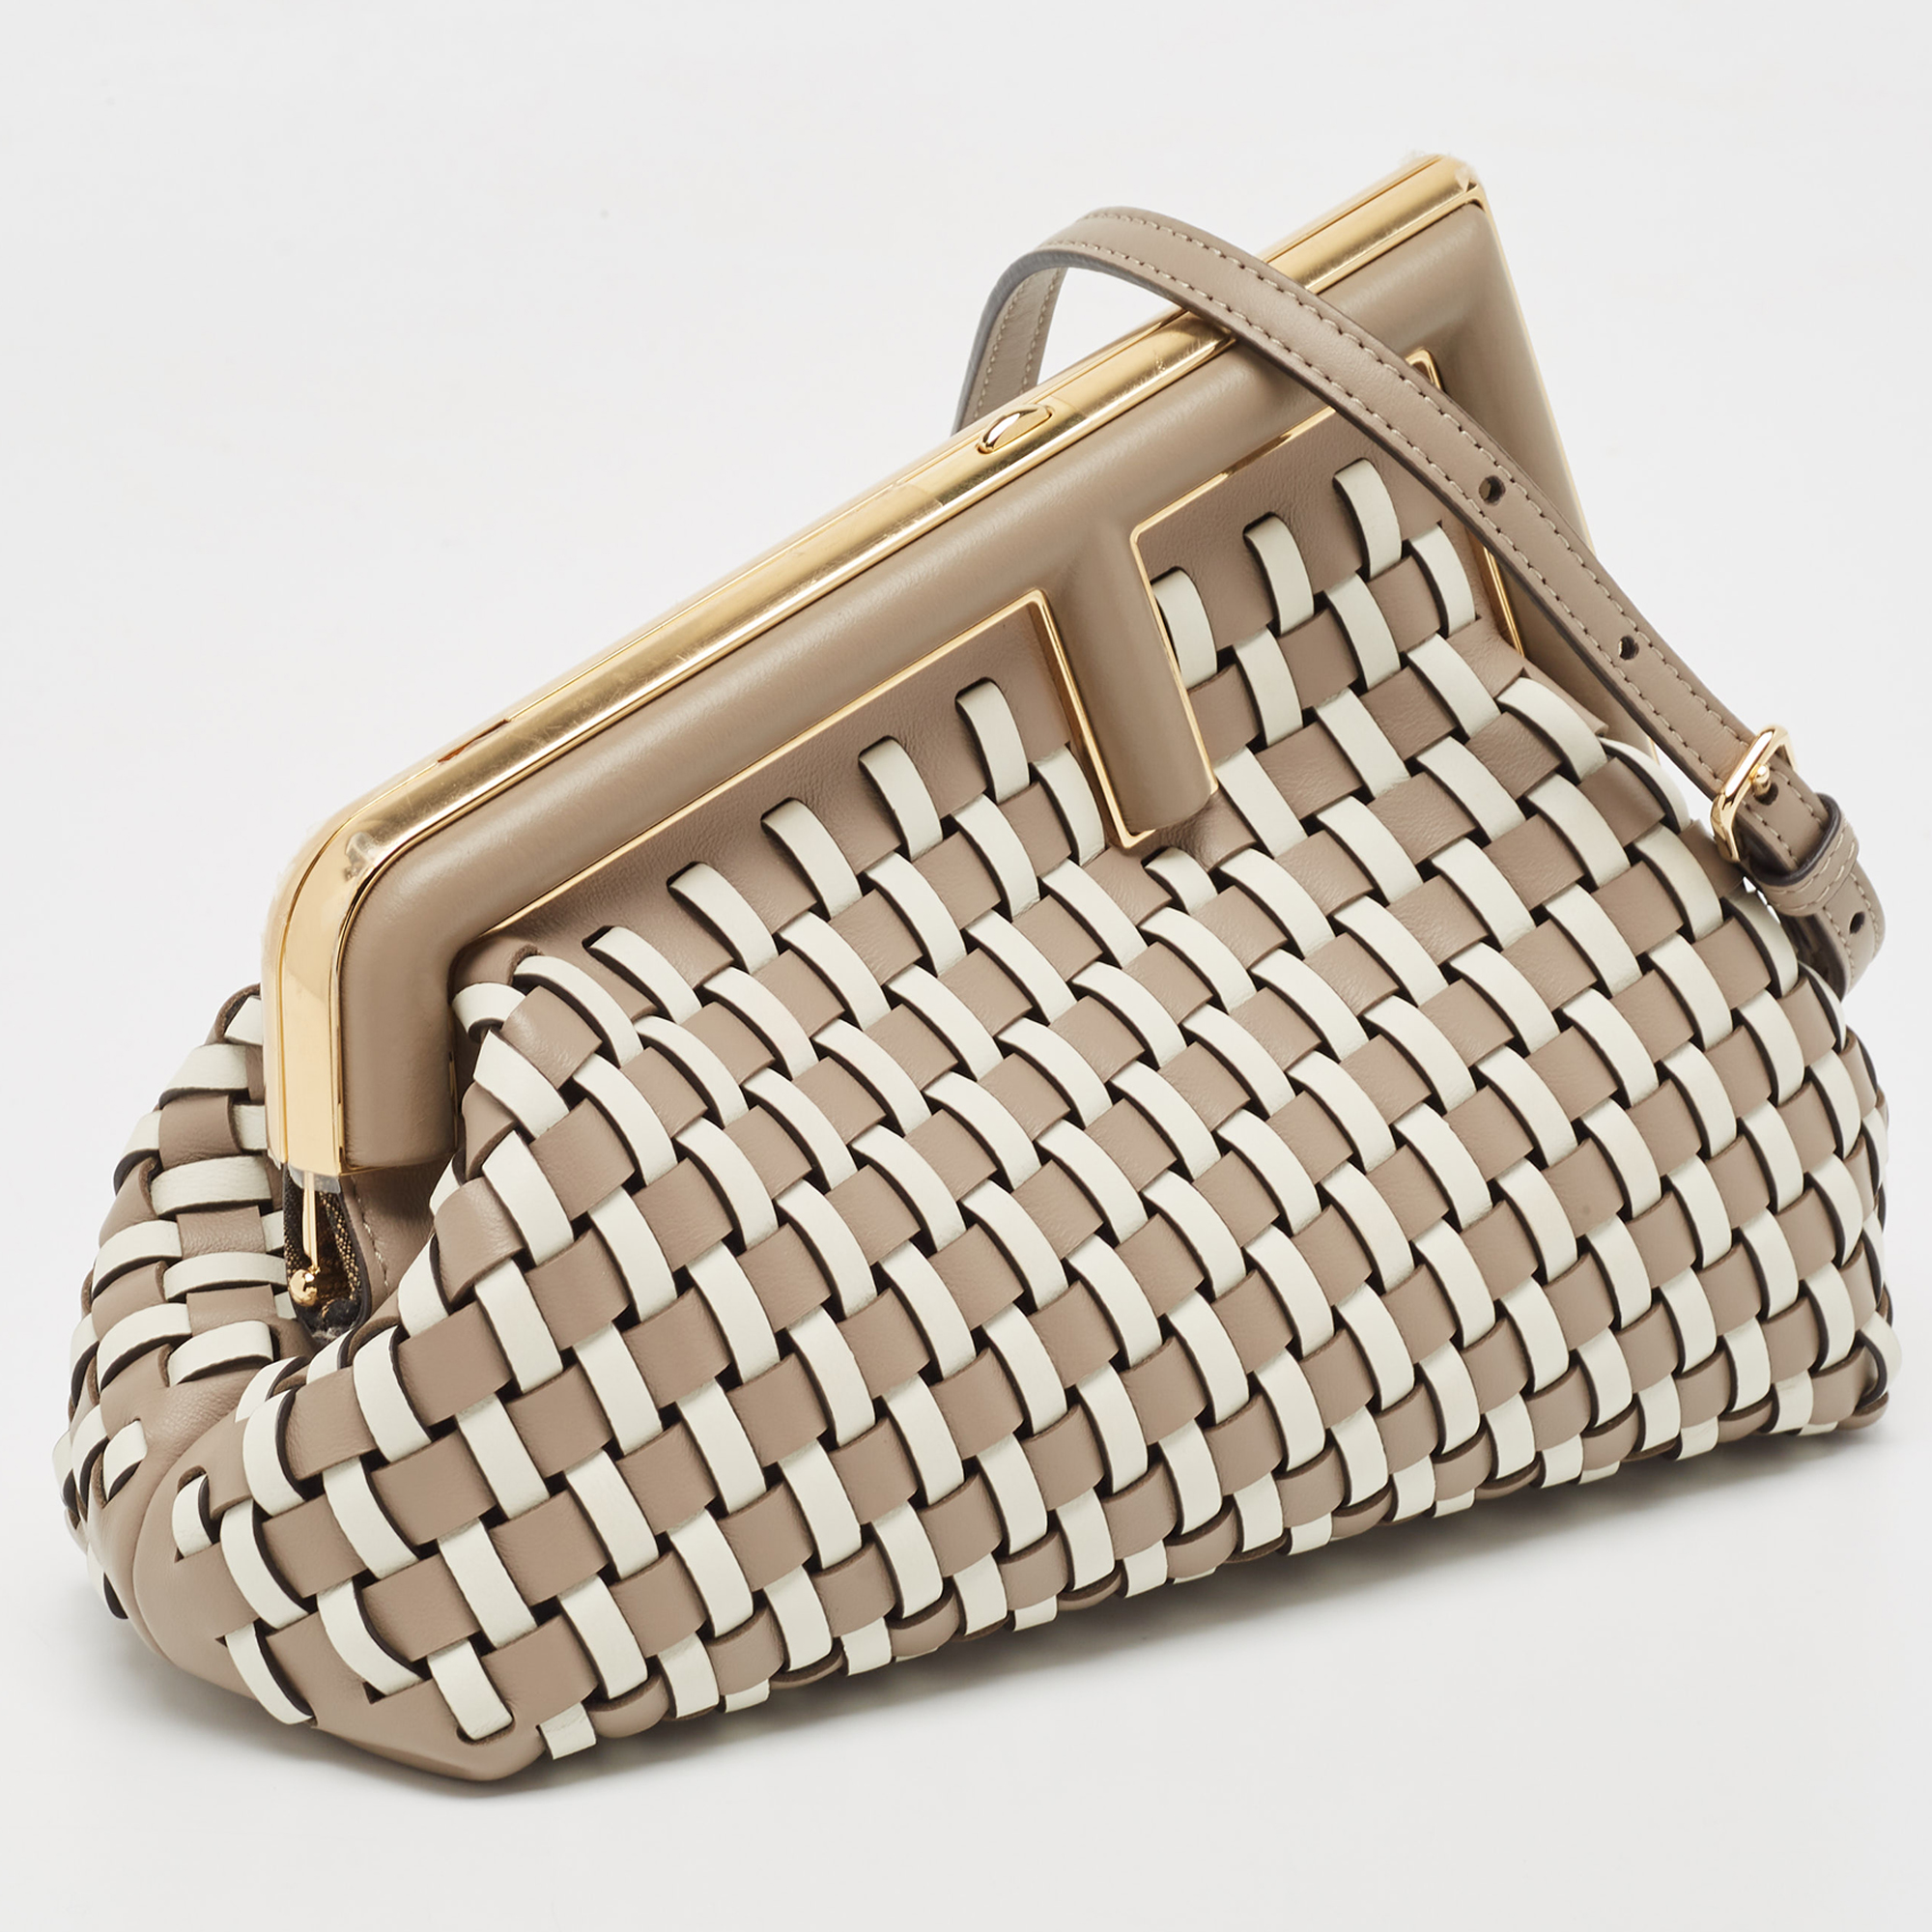 Fendi Beige/White Woven Leather Small First Shoulder Bag